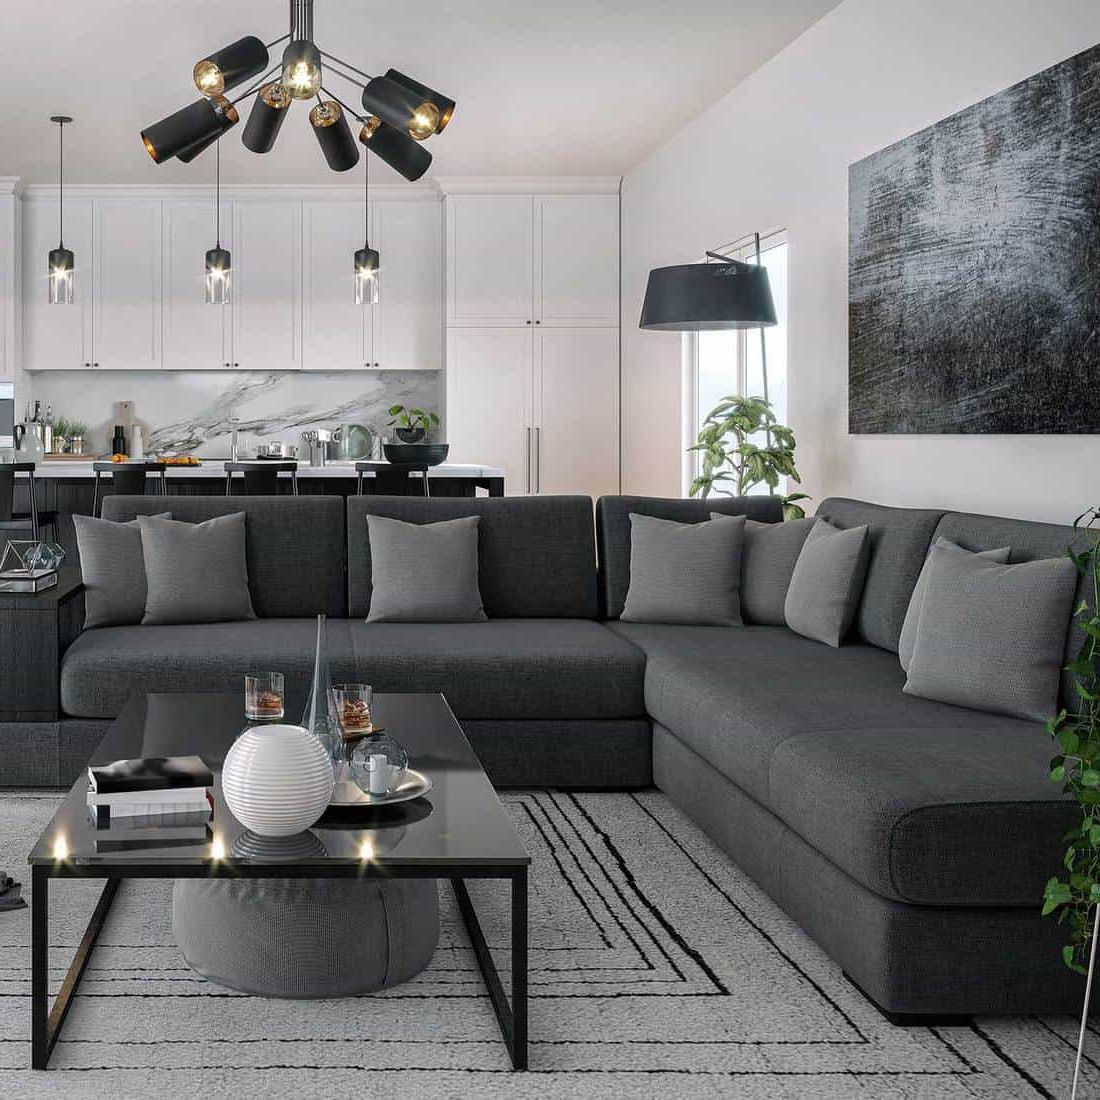 [%34 Gray Couch Living Room Ideas [inc. Photos] For Newest Sofas In Dark Grey|sofas In Dark Grey Intended For Well Known 34 Gray Couch Living Room Ideas [inc. Photos]|newest Sofas In Dark Grey In 34 Gray Couch Living Room Ideas [inc. Photos]|famous 34 Gray Couch Living Room Ideas [inc. Photos] With Regard To Sofas In Dark Grey%] (Photo 10 of 15)